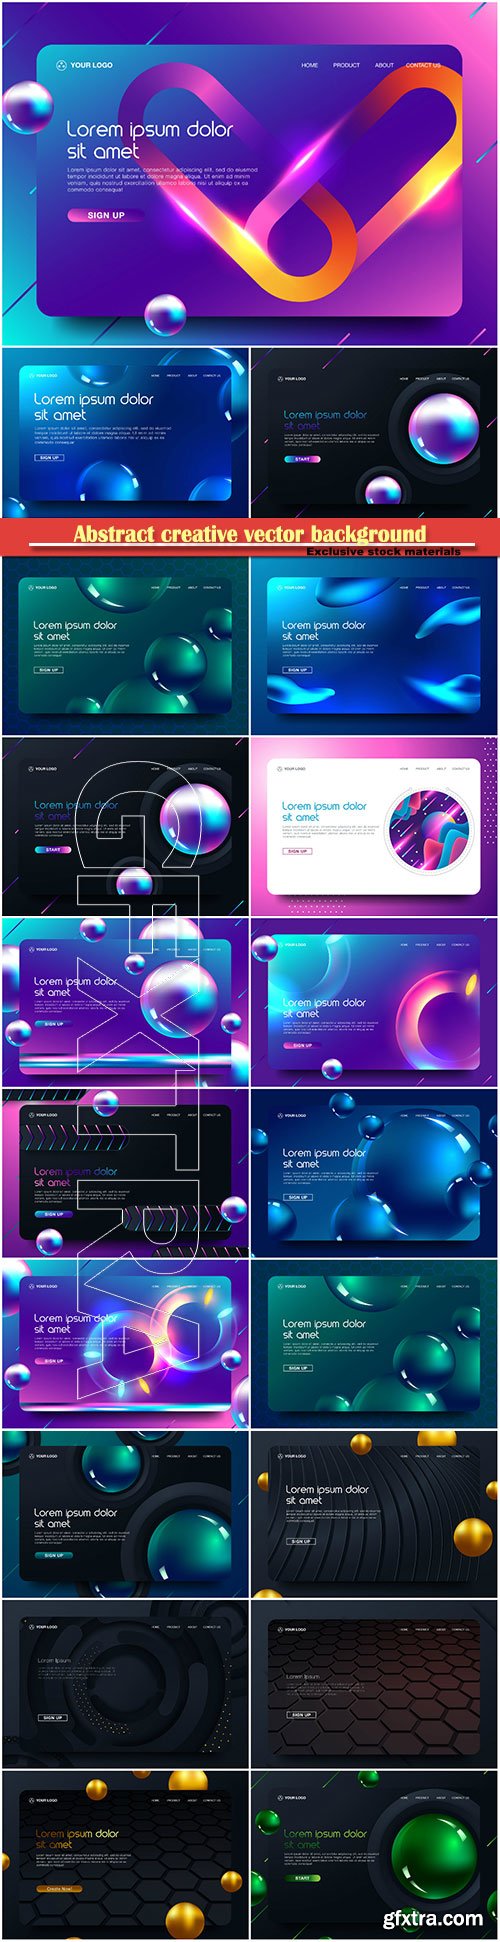 Abstract creative vector background